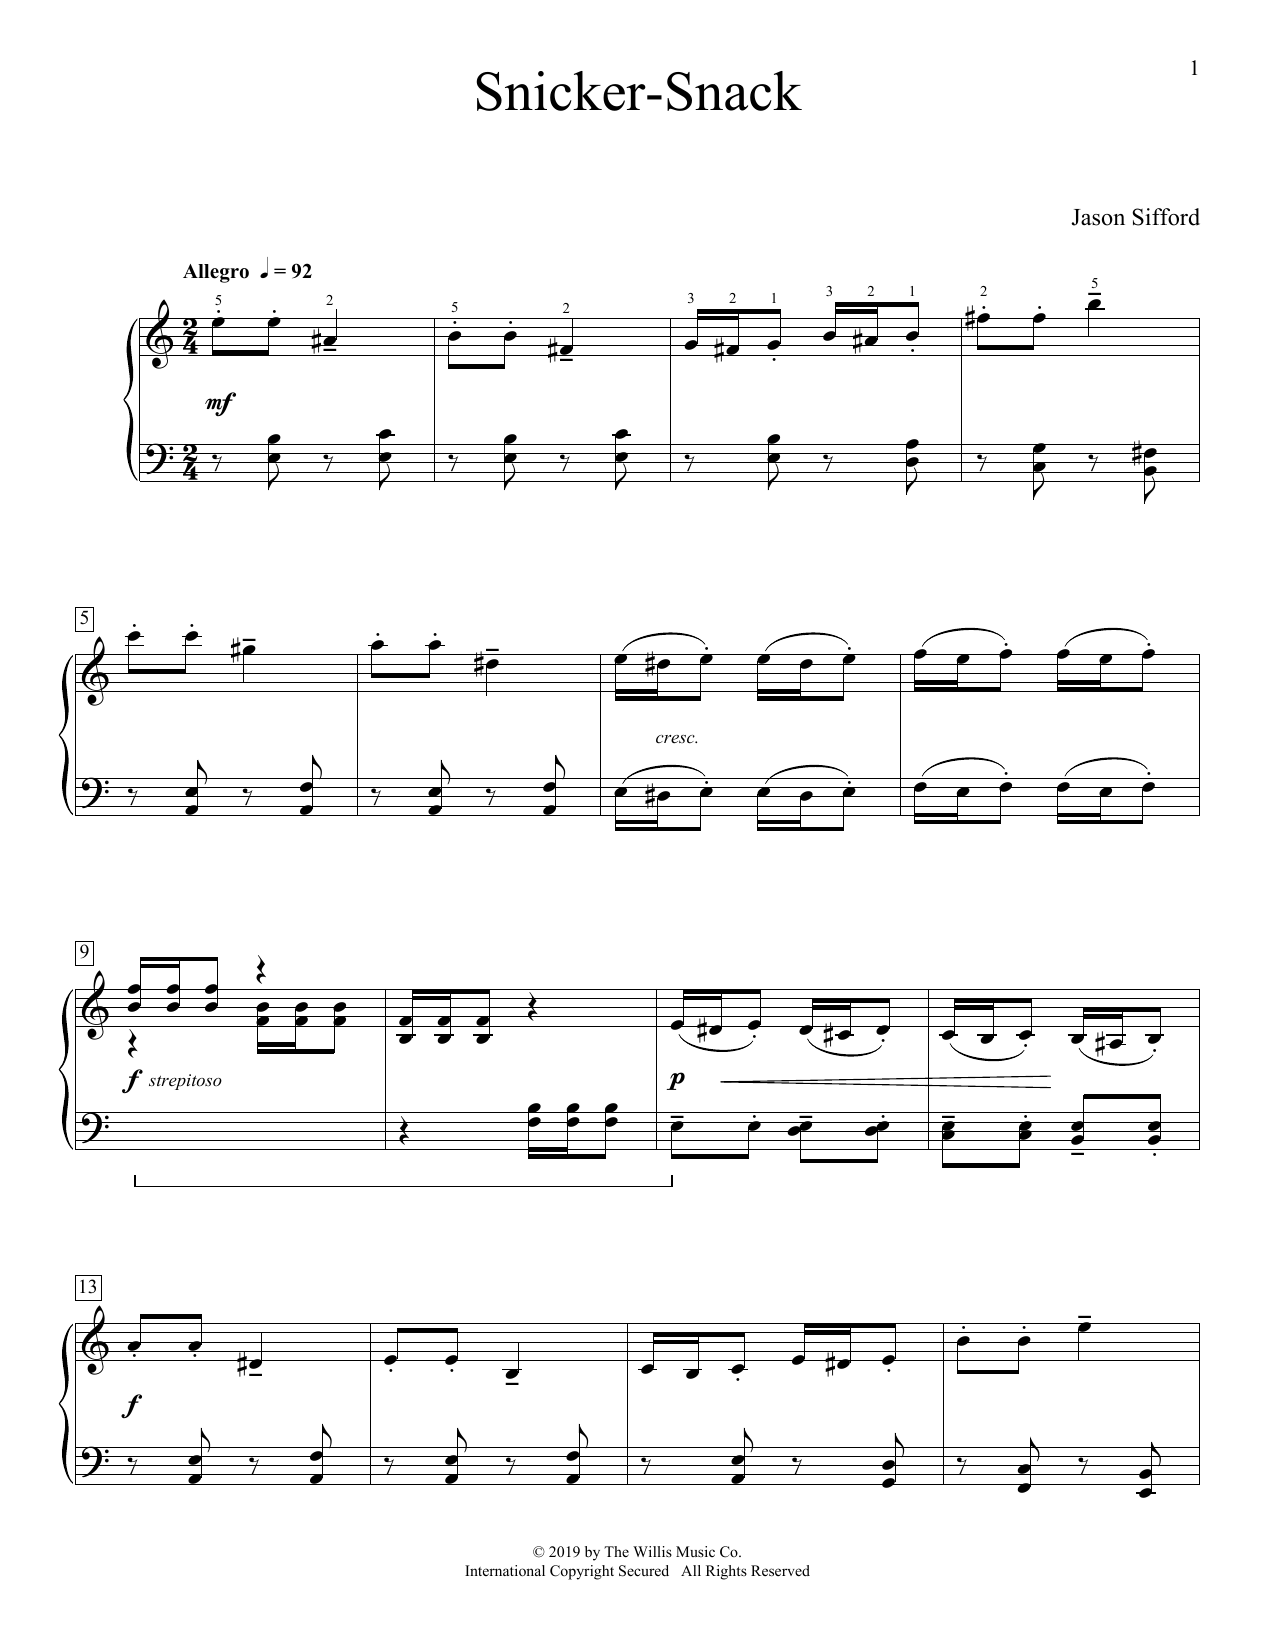 Download Jason Sifford Snicker-Snack Sheet Music